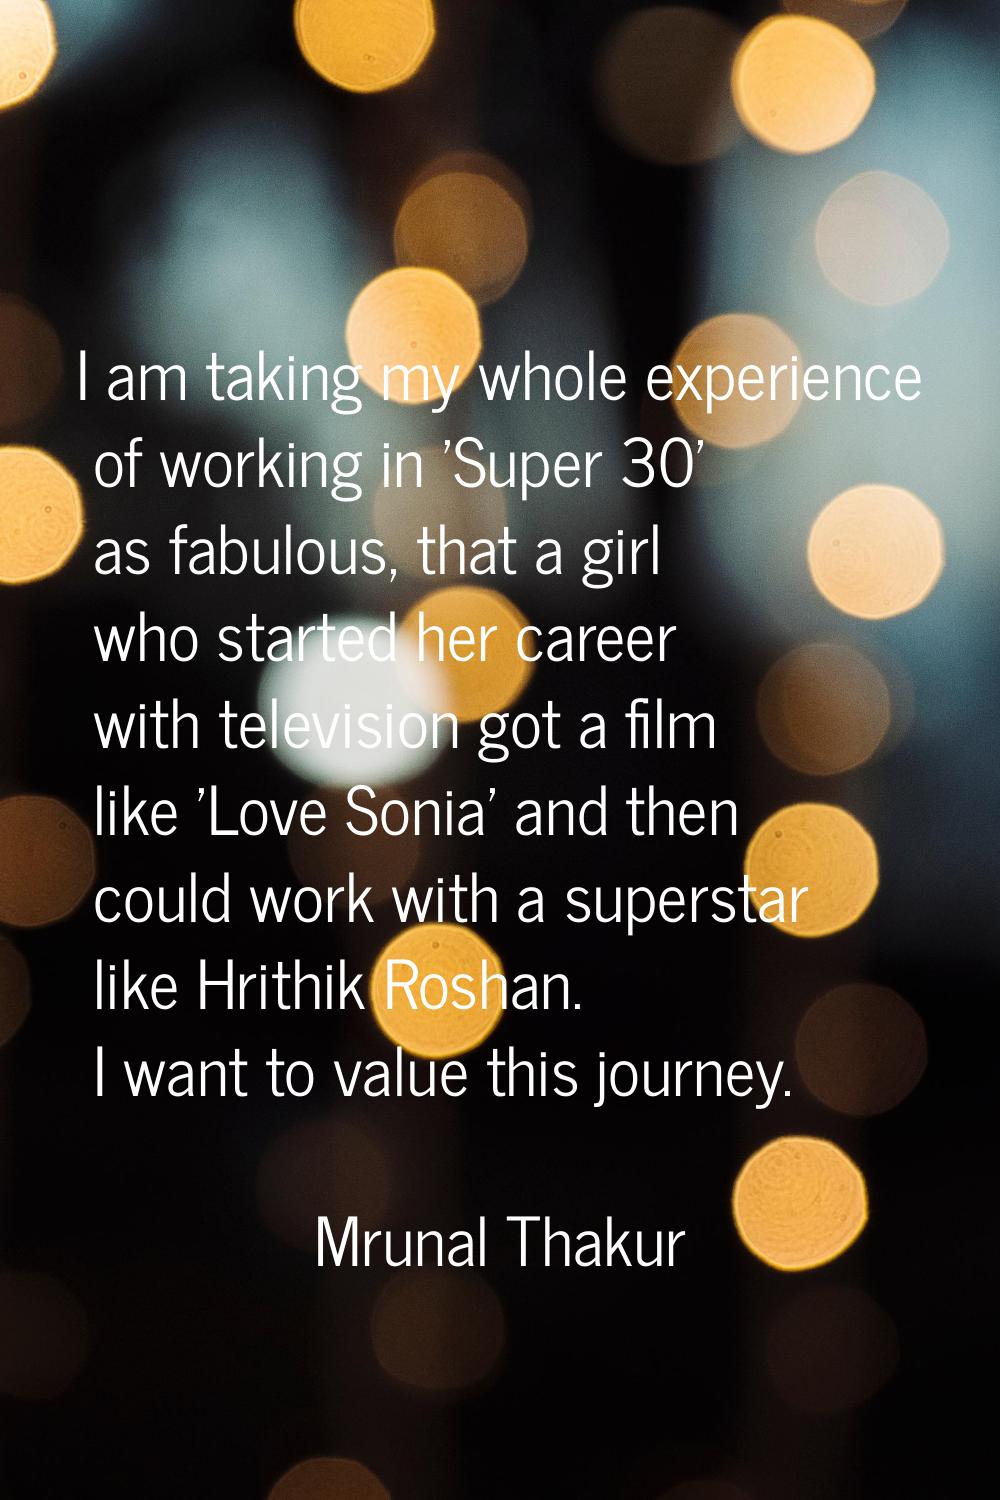 I am taking my whole experience of working in 'Super 30' as fabulous, that a girl who started her c